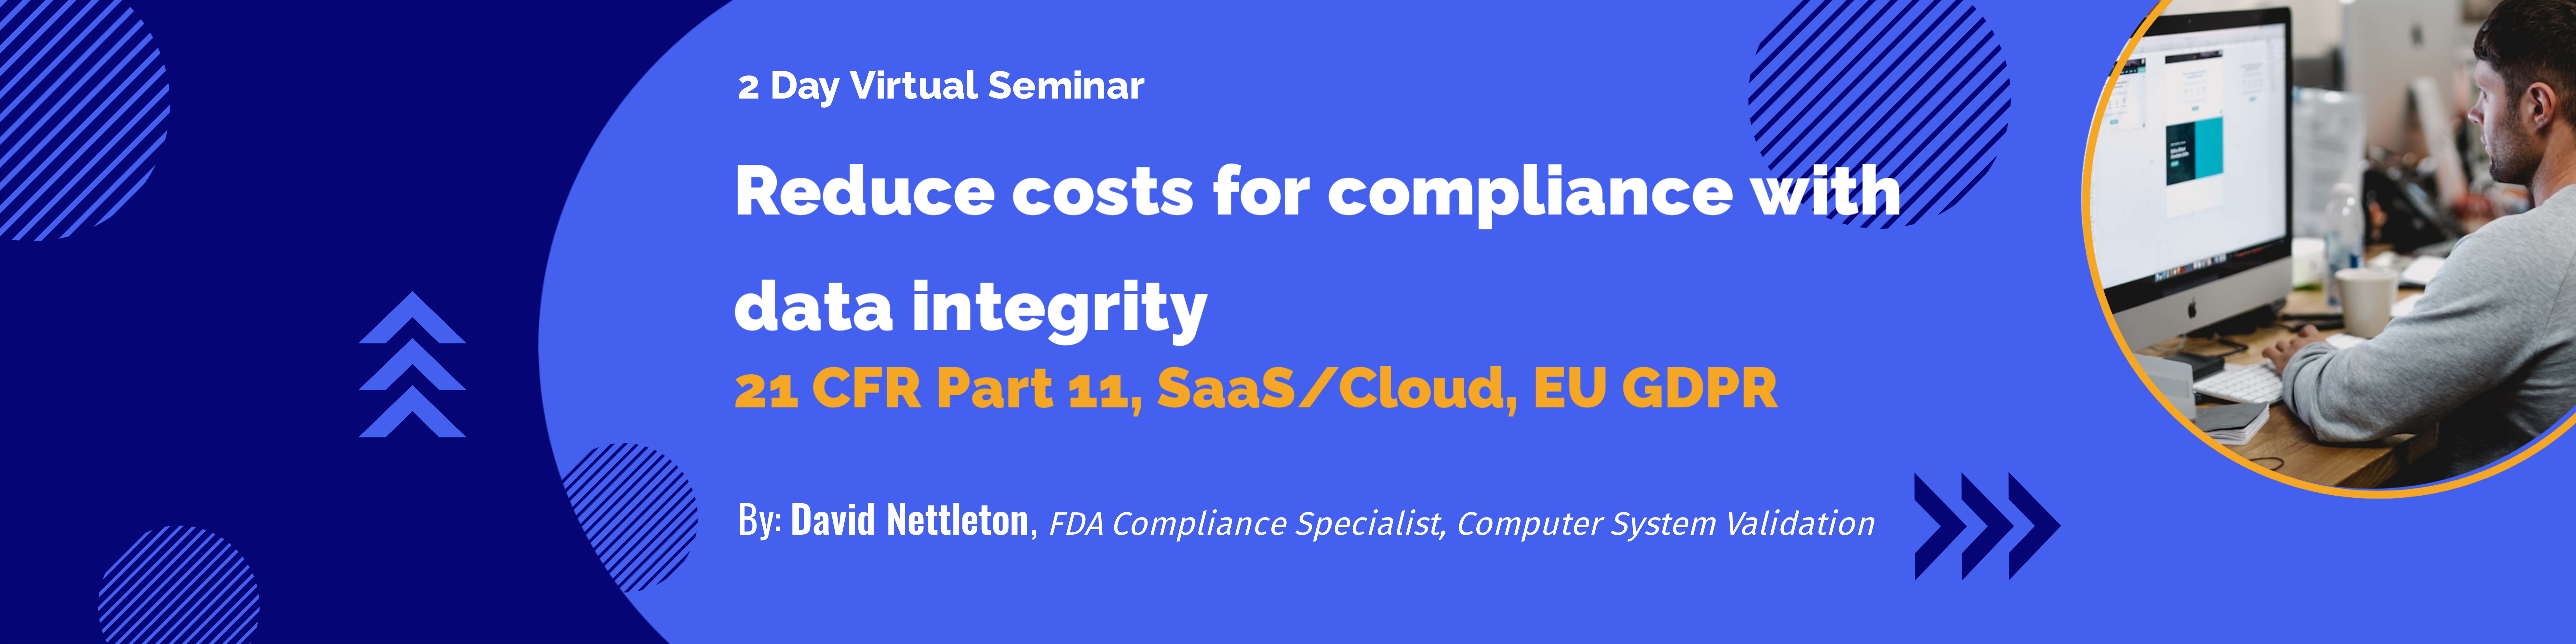 Reduce costs for compliance with data integrity 21 CFR Part 11 SaaS/Cloud EU GDPR